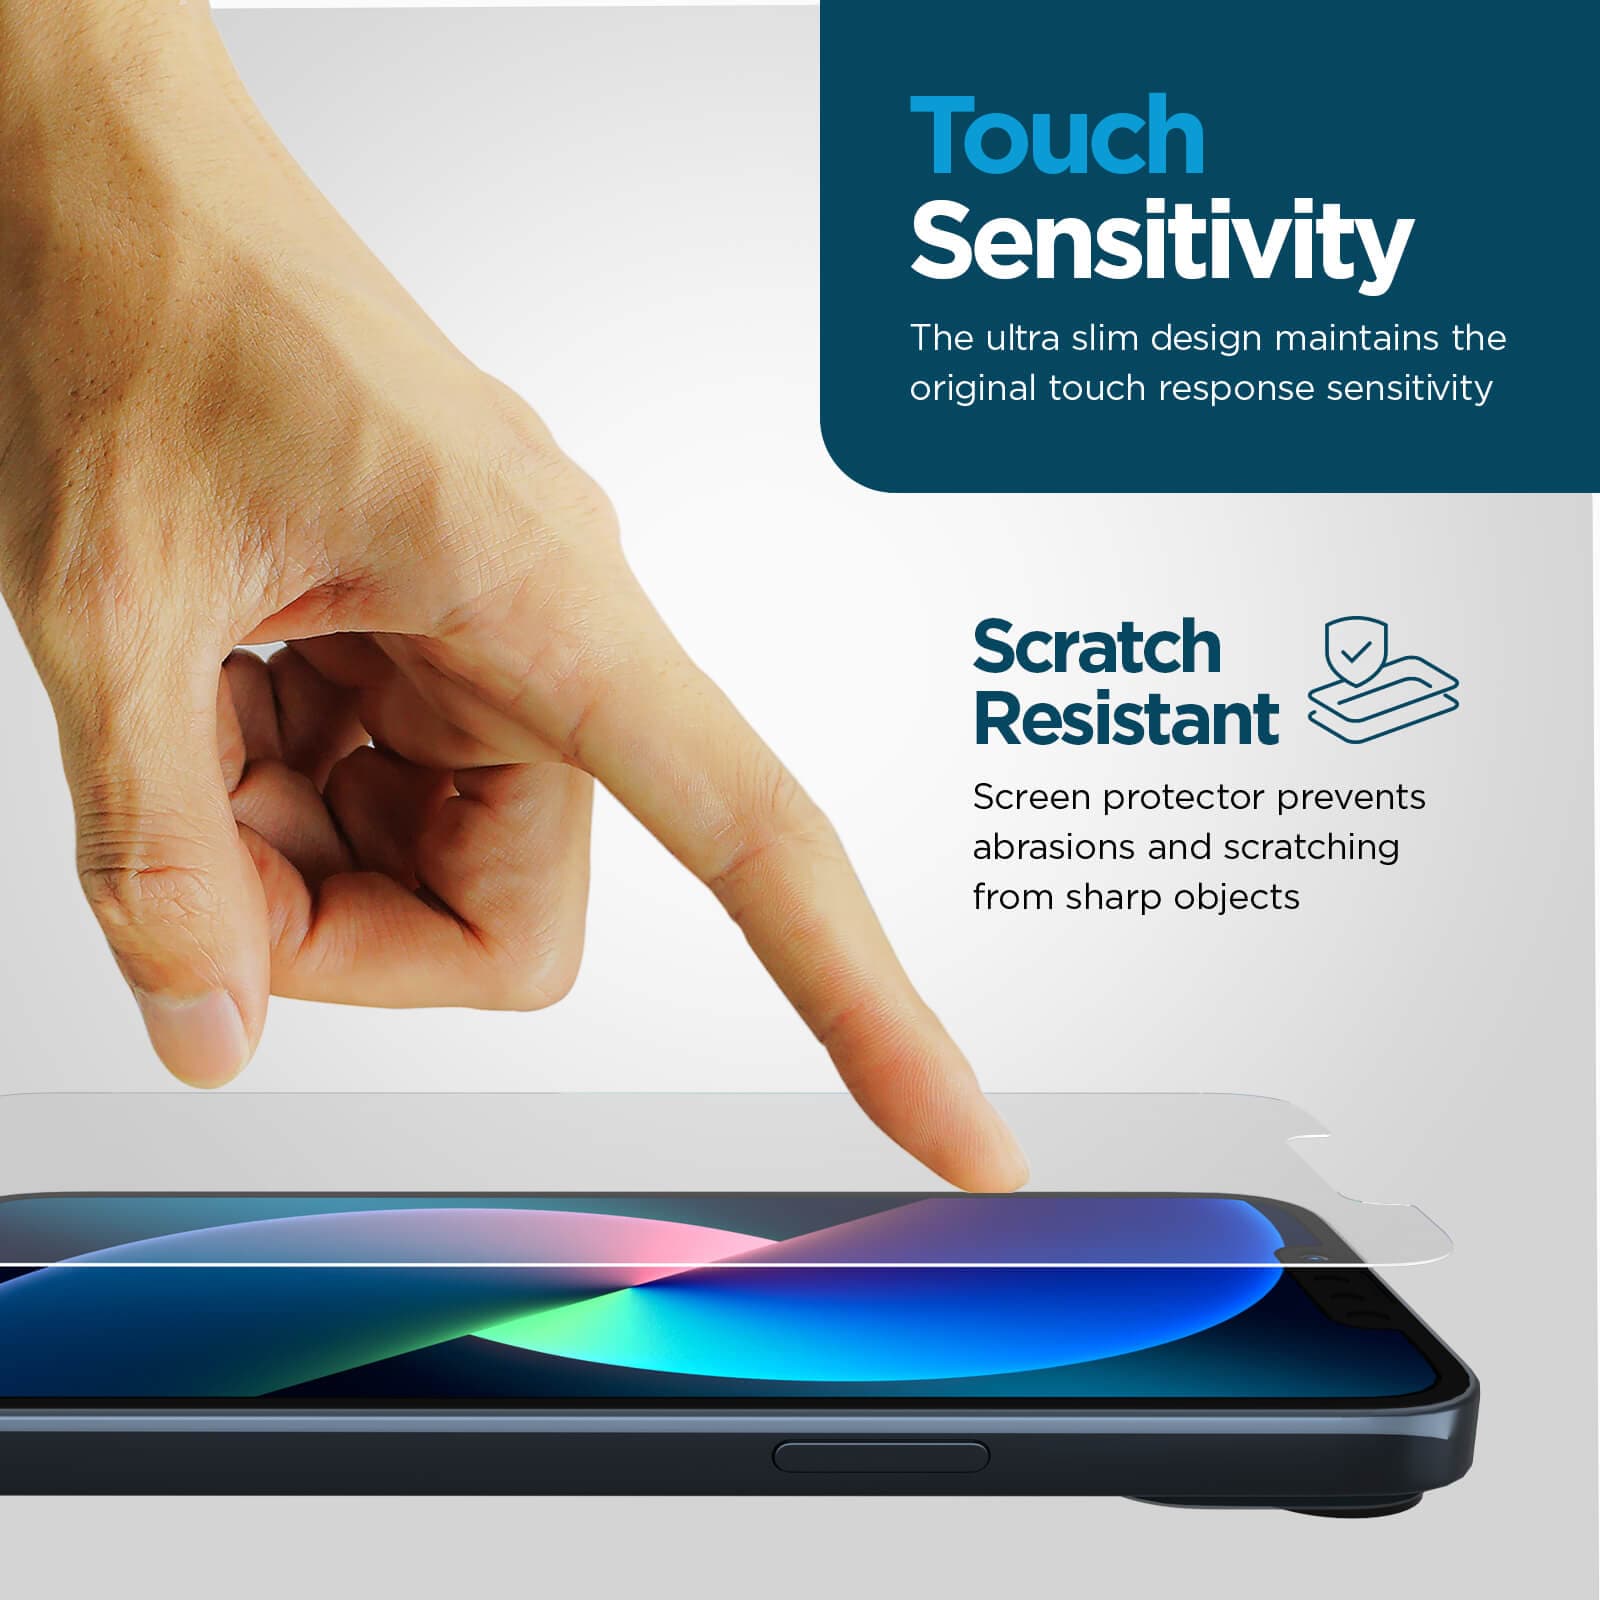 Touch sensitivity. The ultra slim design maintains the original touch response sensitivity. Scratch resistant screen protector prevents abrasions and scratching from sharp objects. color::Clear